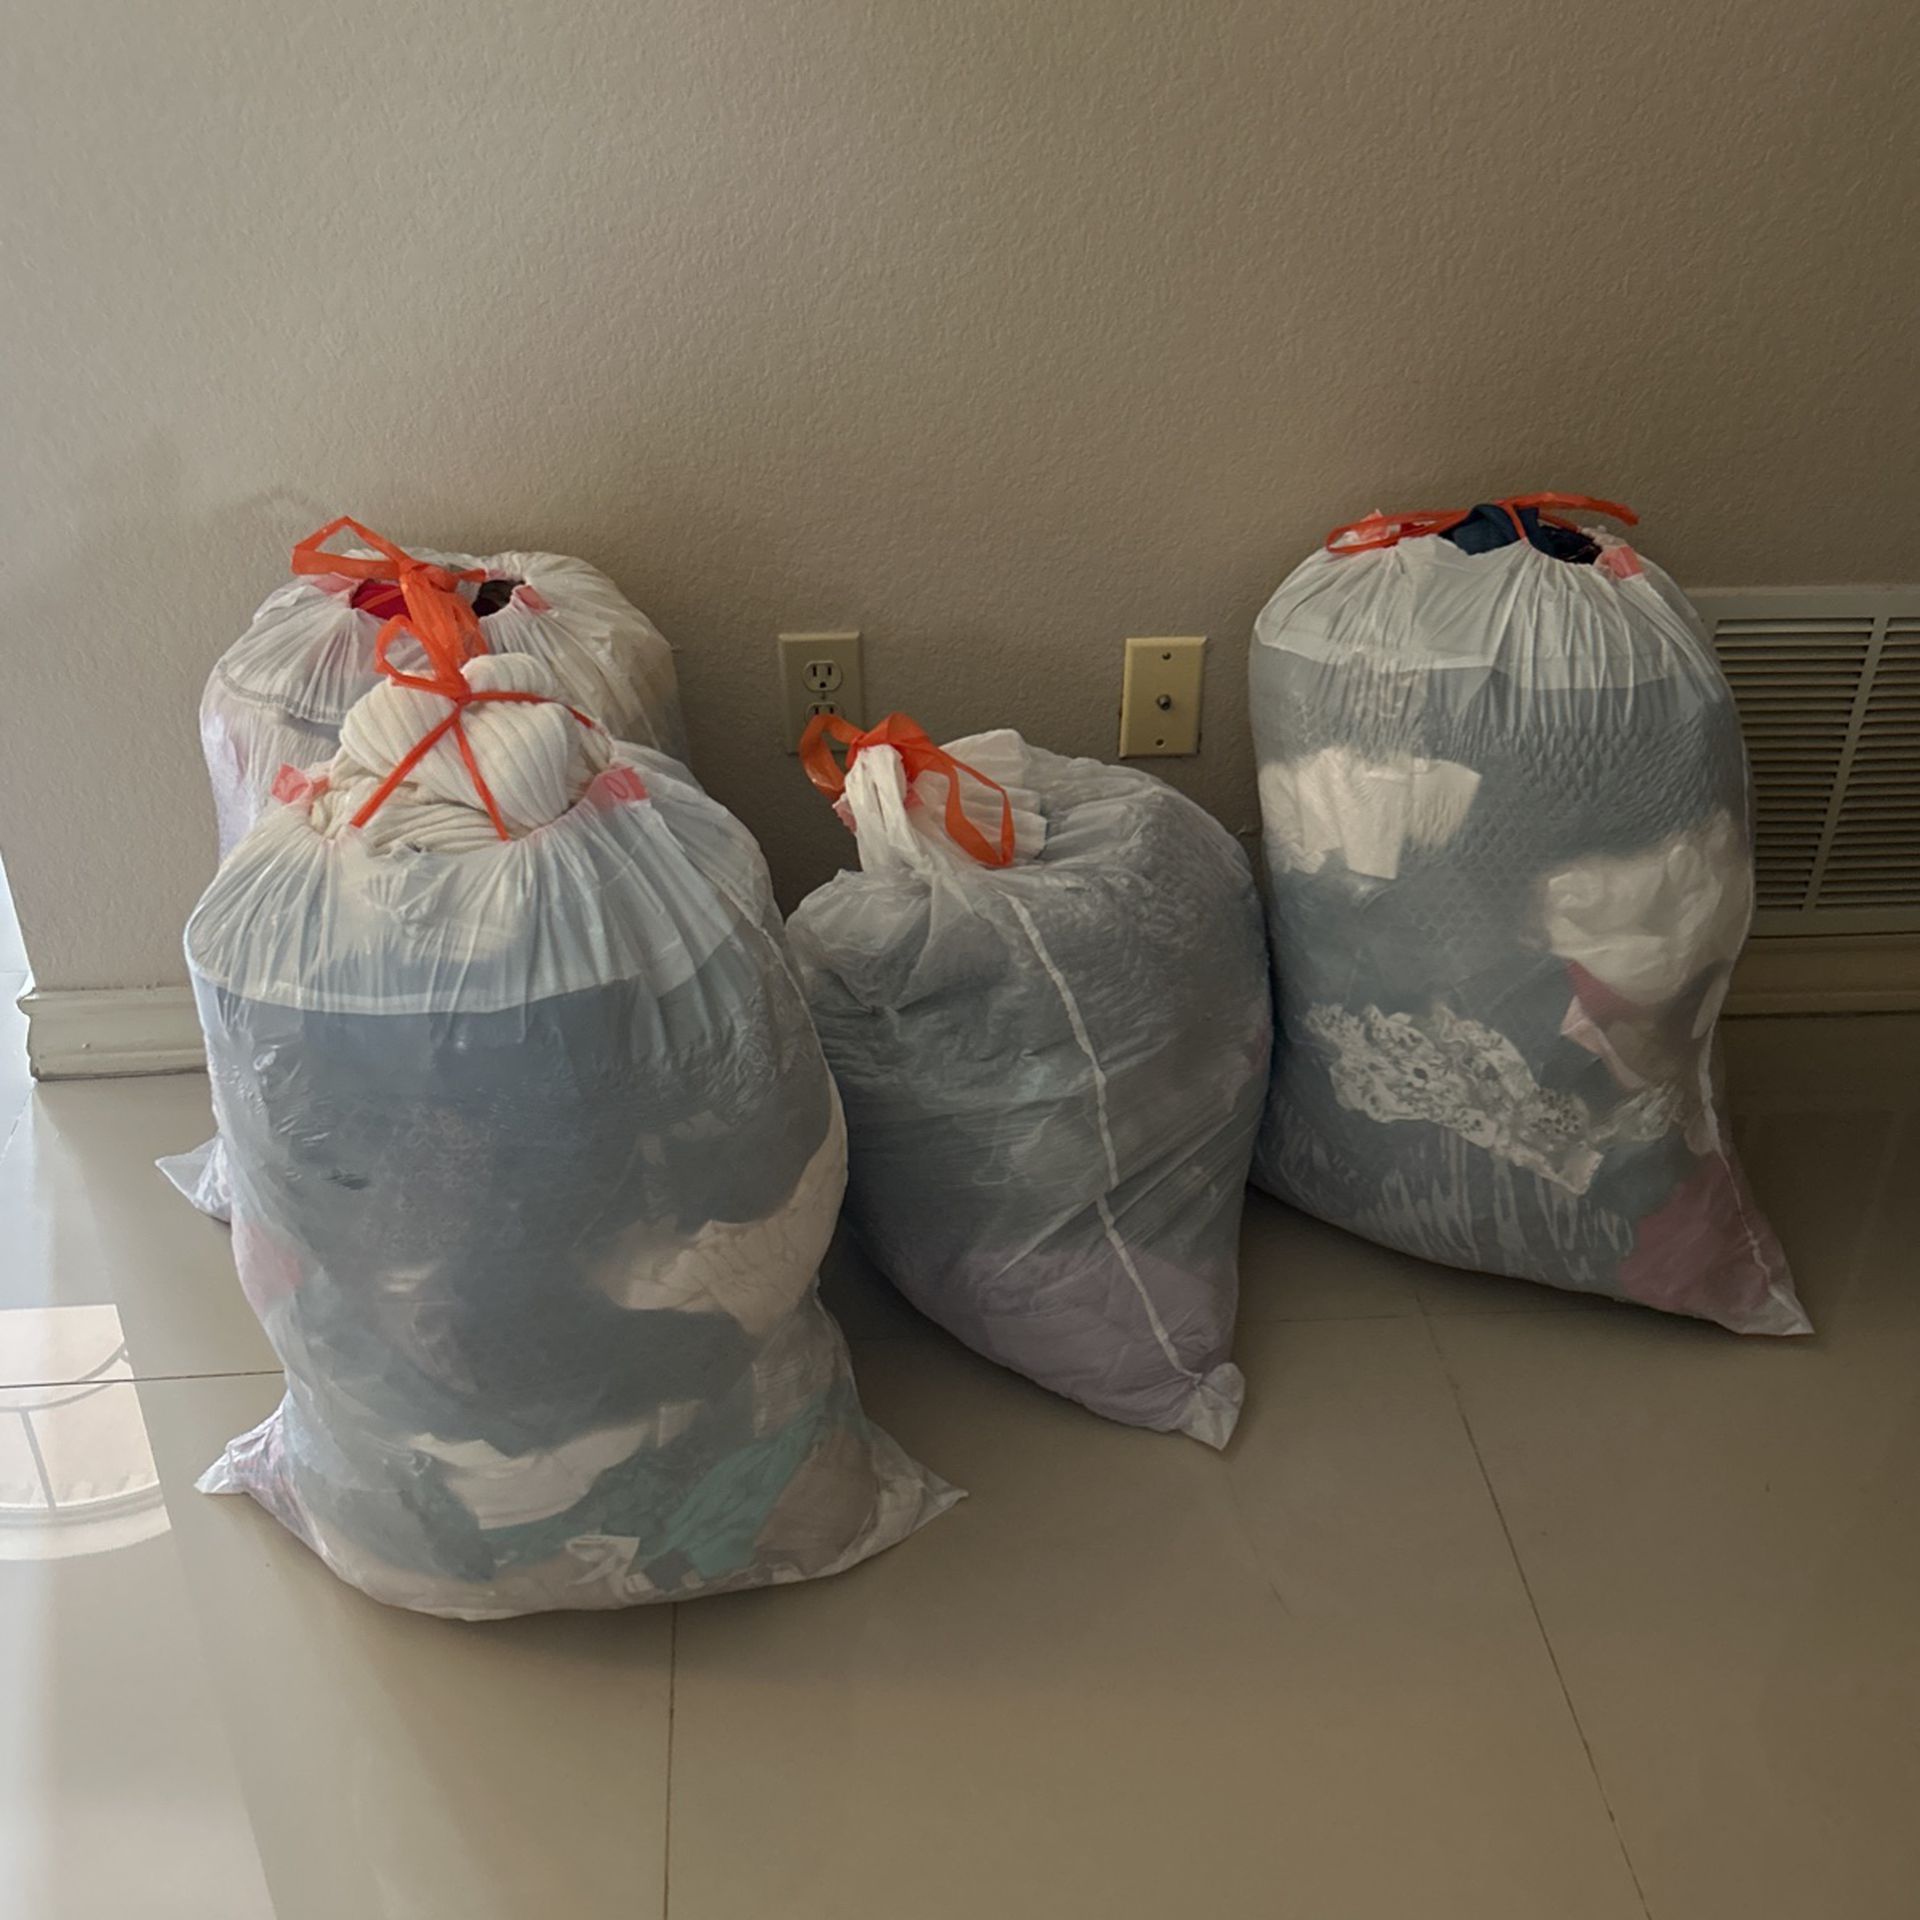 bags of clothing